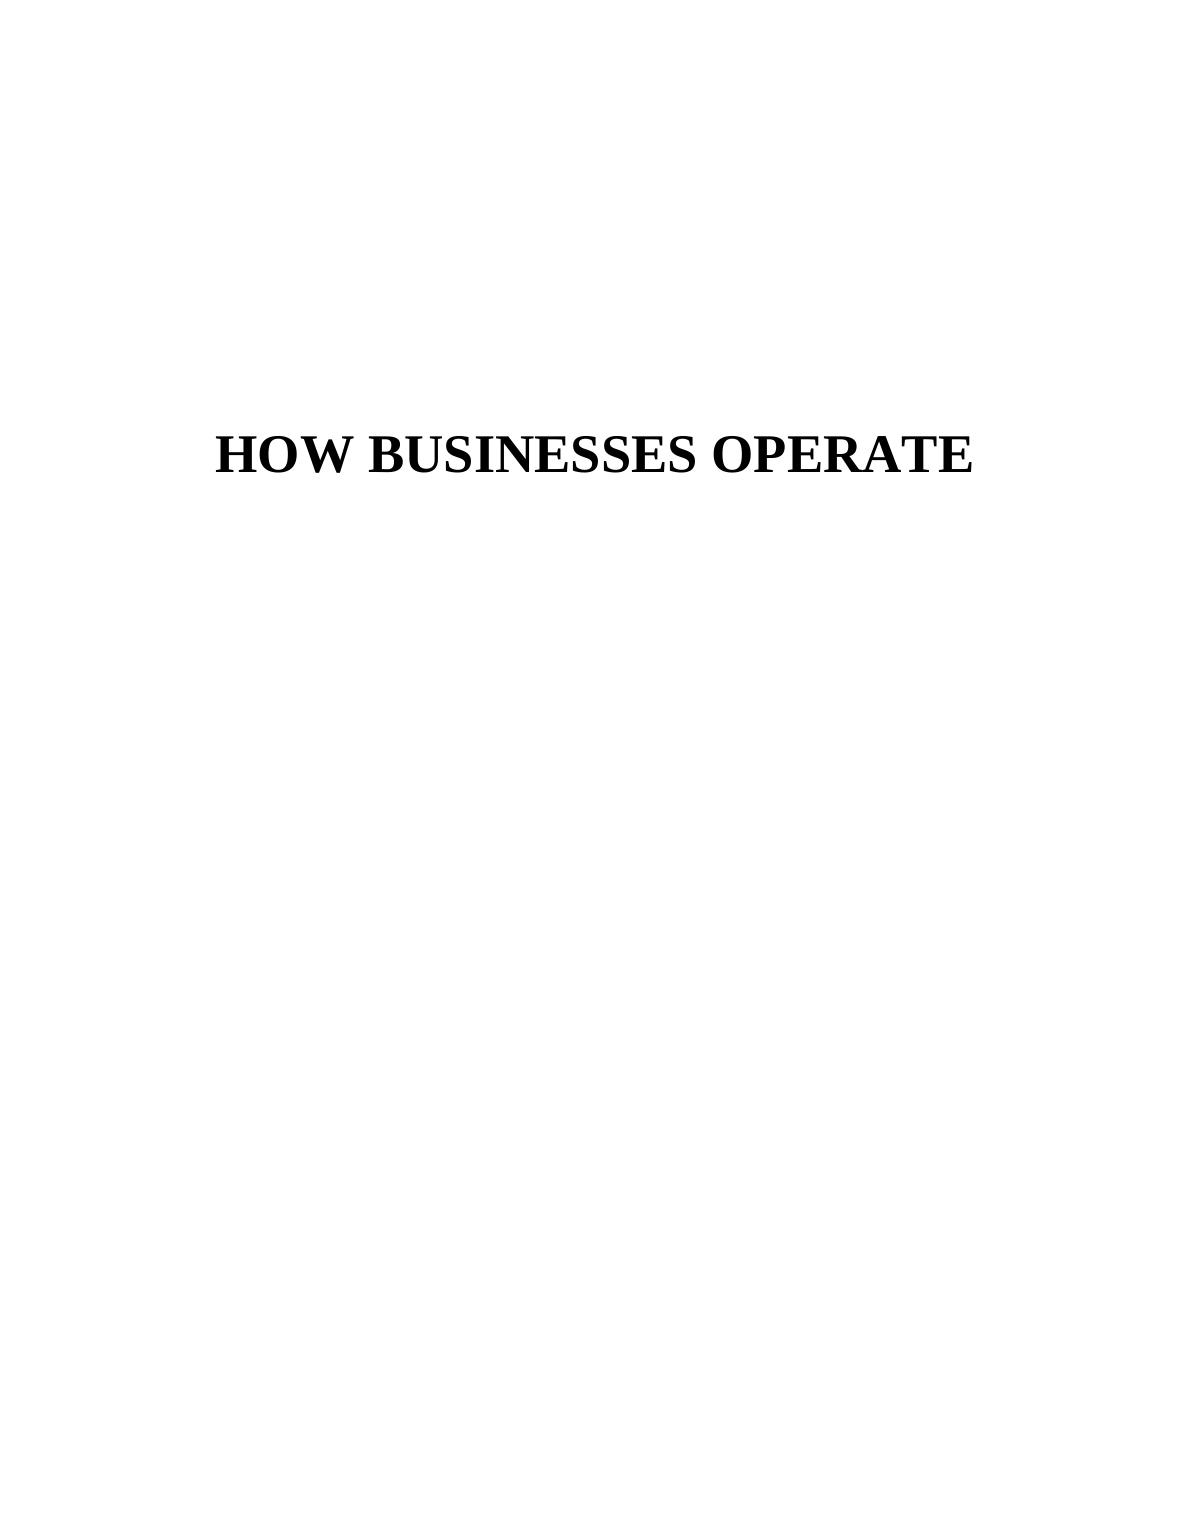 How Businesses Operate - Types of Organization_1